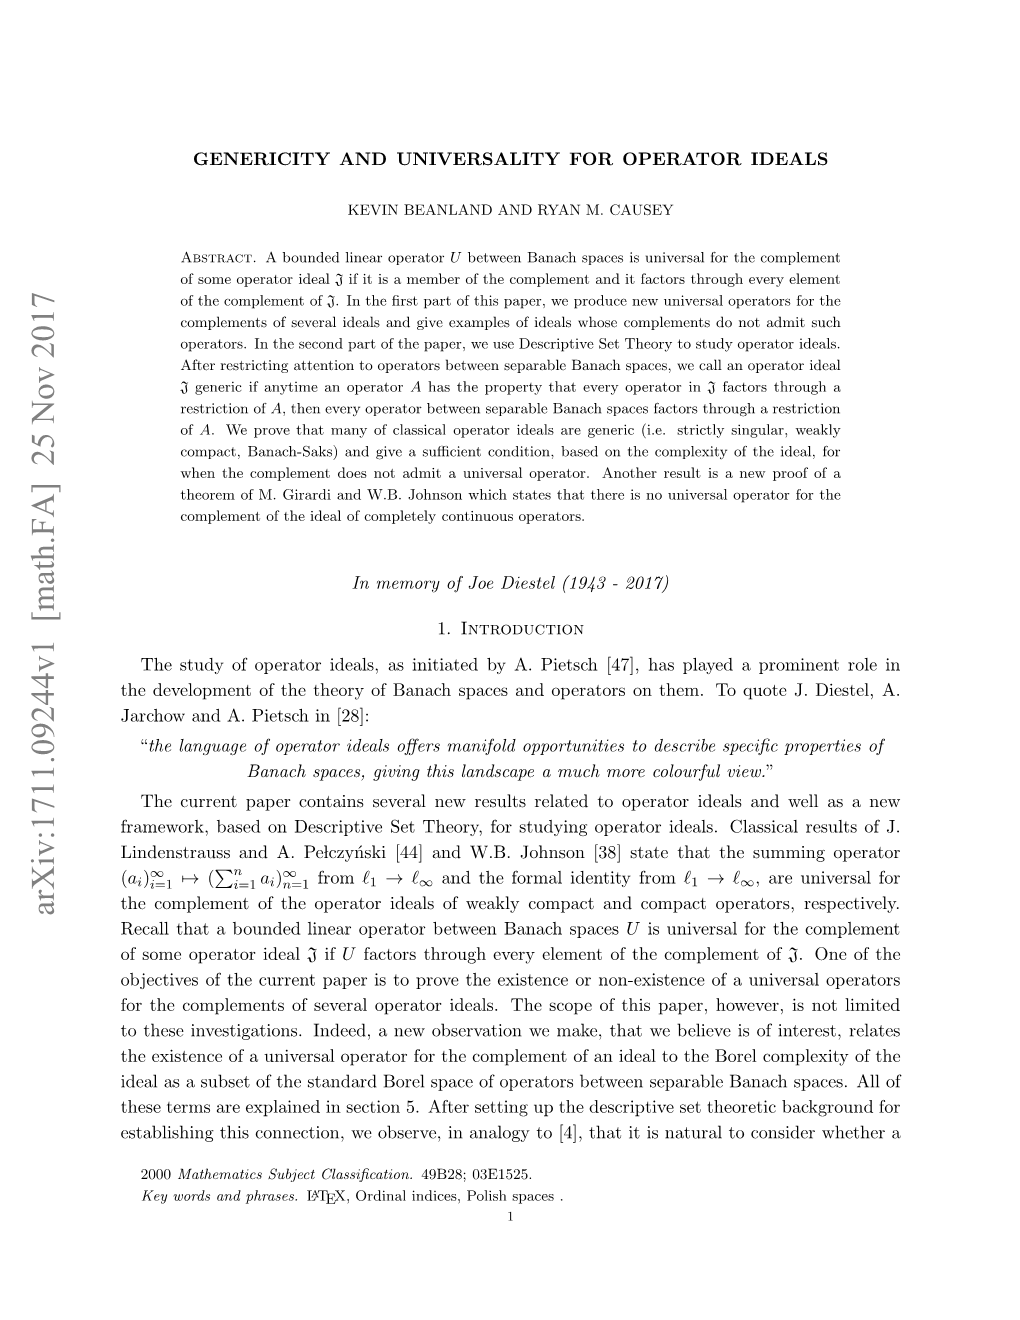 Genericity and Universality for Operator Ideals